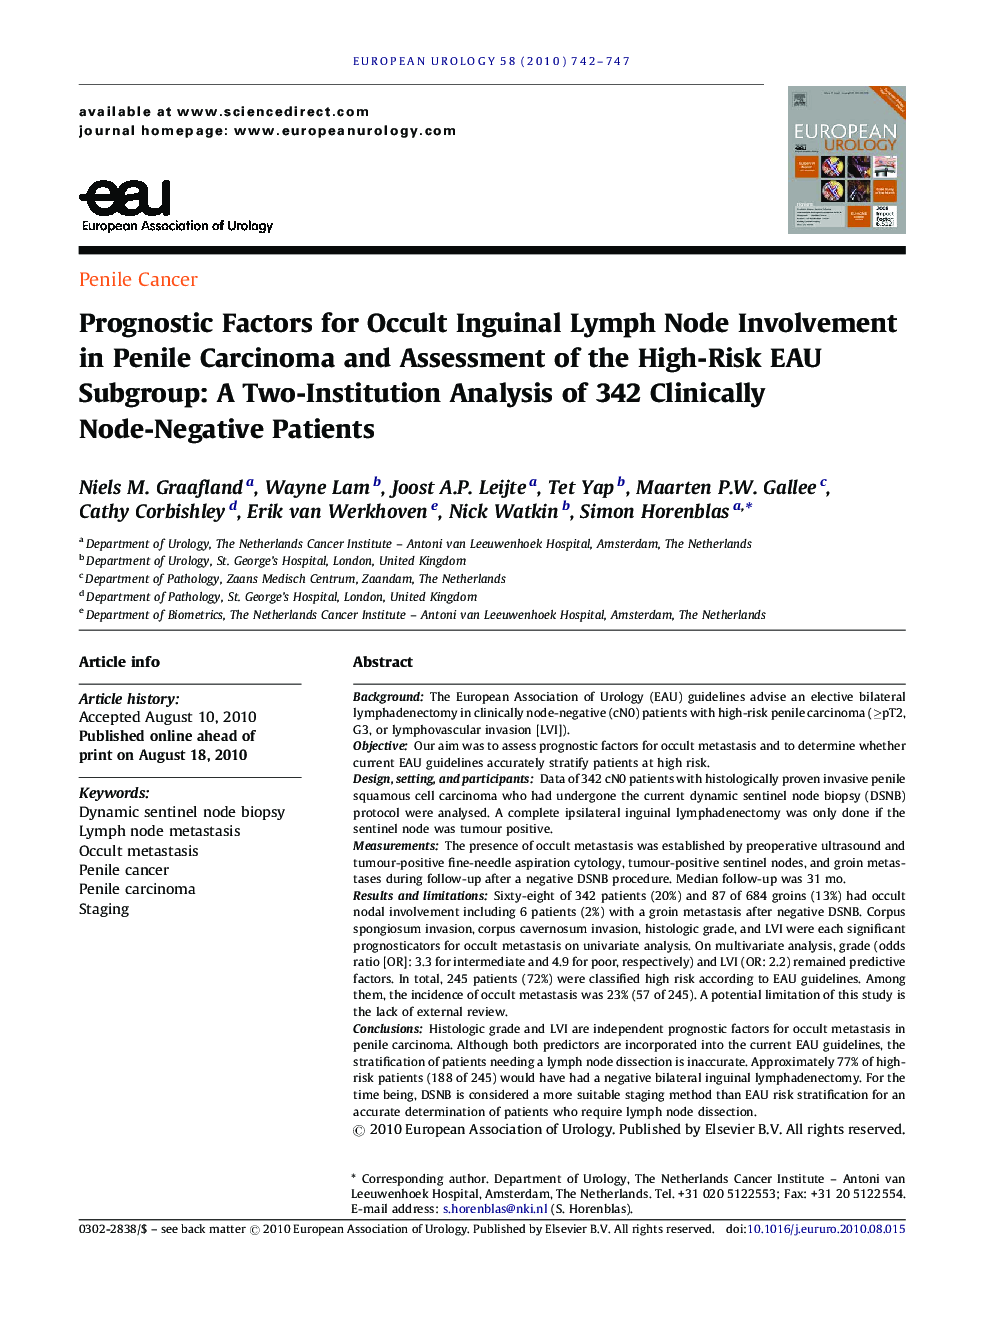 Prognostic Factors for Occult Inguinal Lymph Node Involvement in Penile Carcinoma and Assessment of the High-Risk EAU Subgroup: A Two-Institution Analysis of 342 Clinically Node-Negative Patients